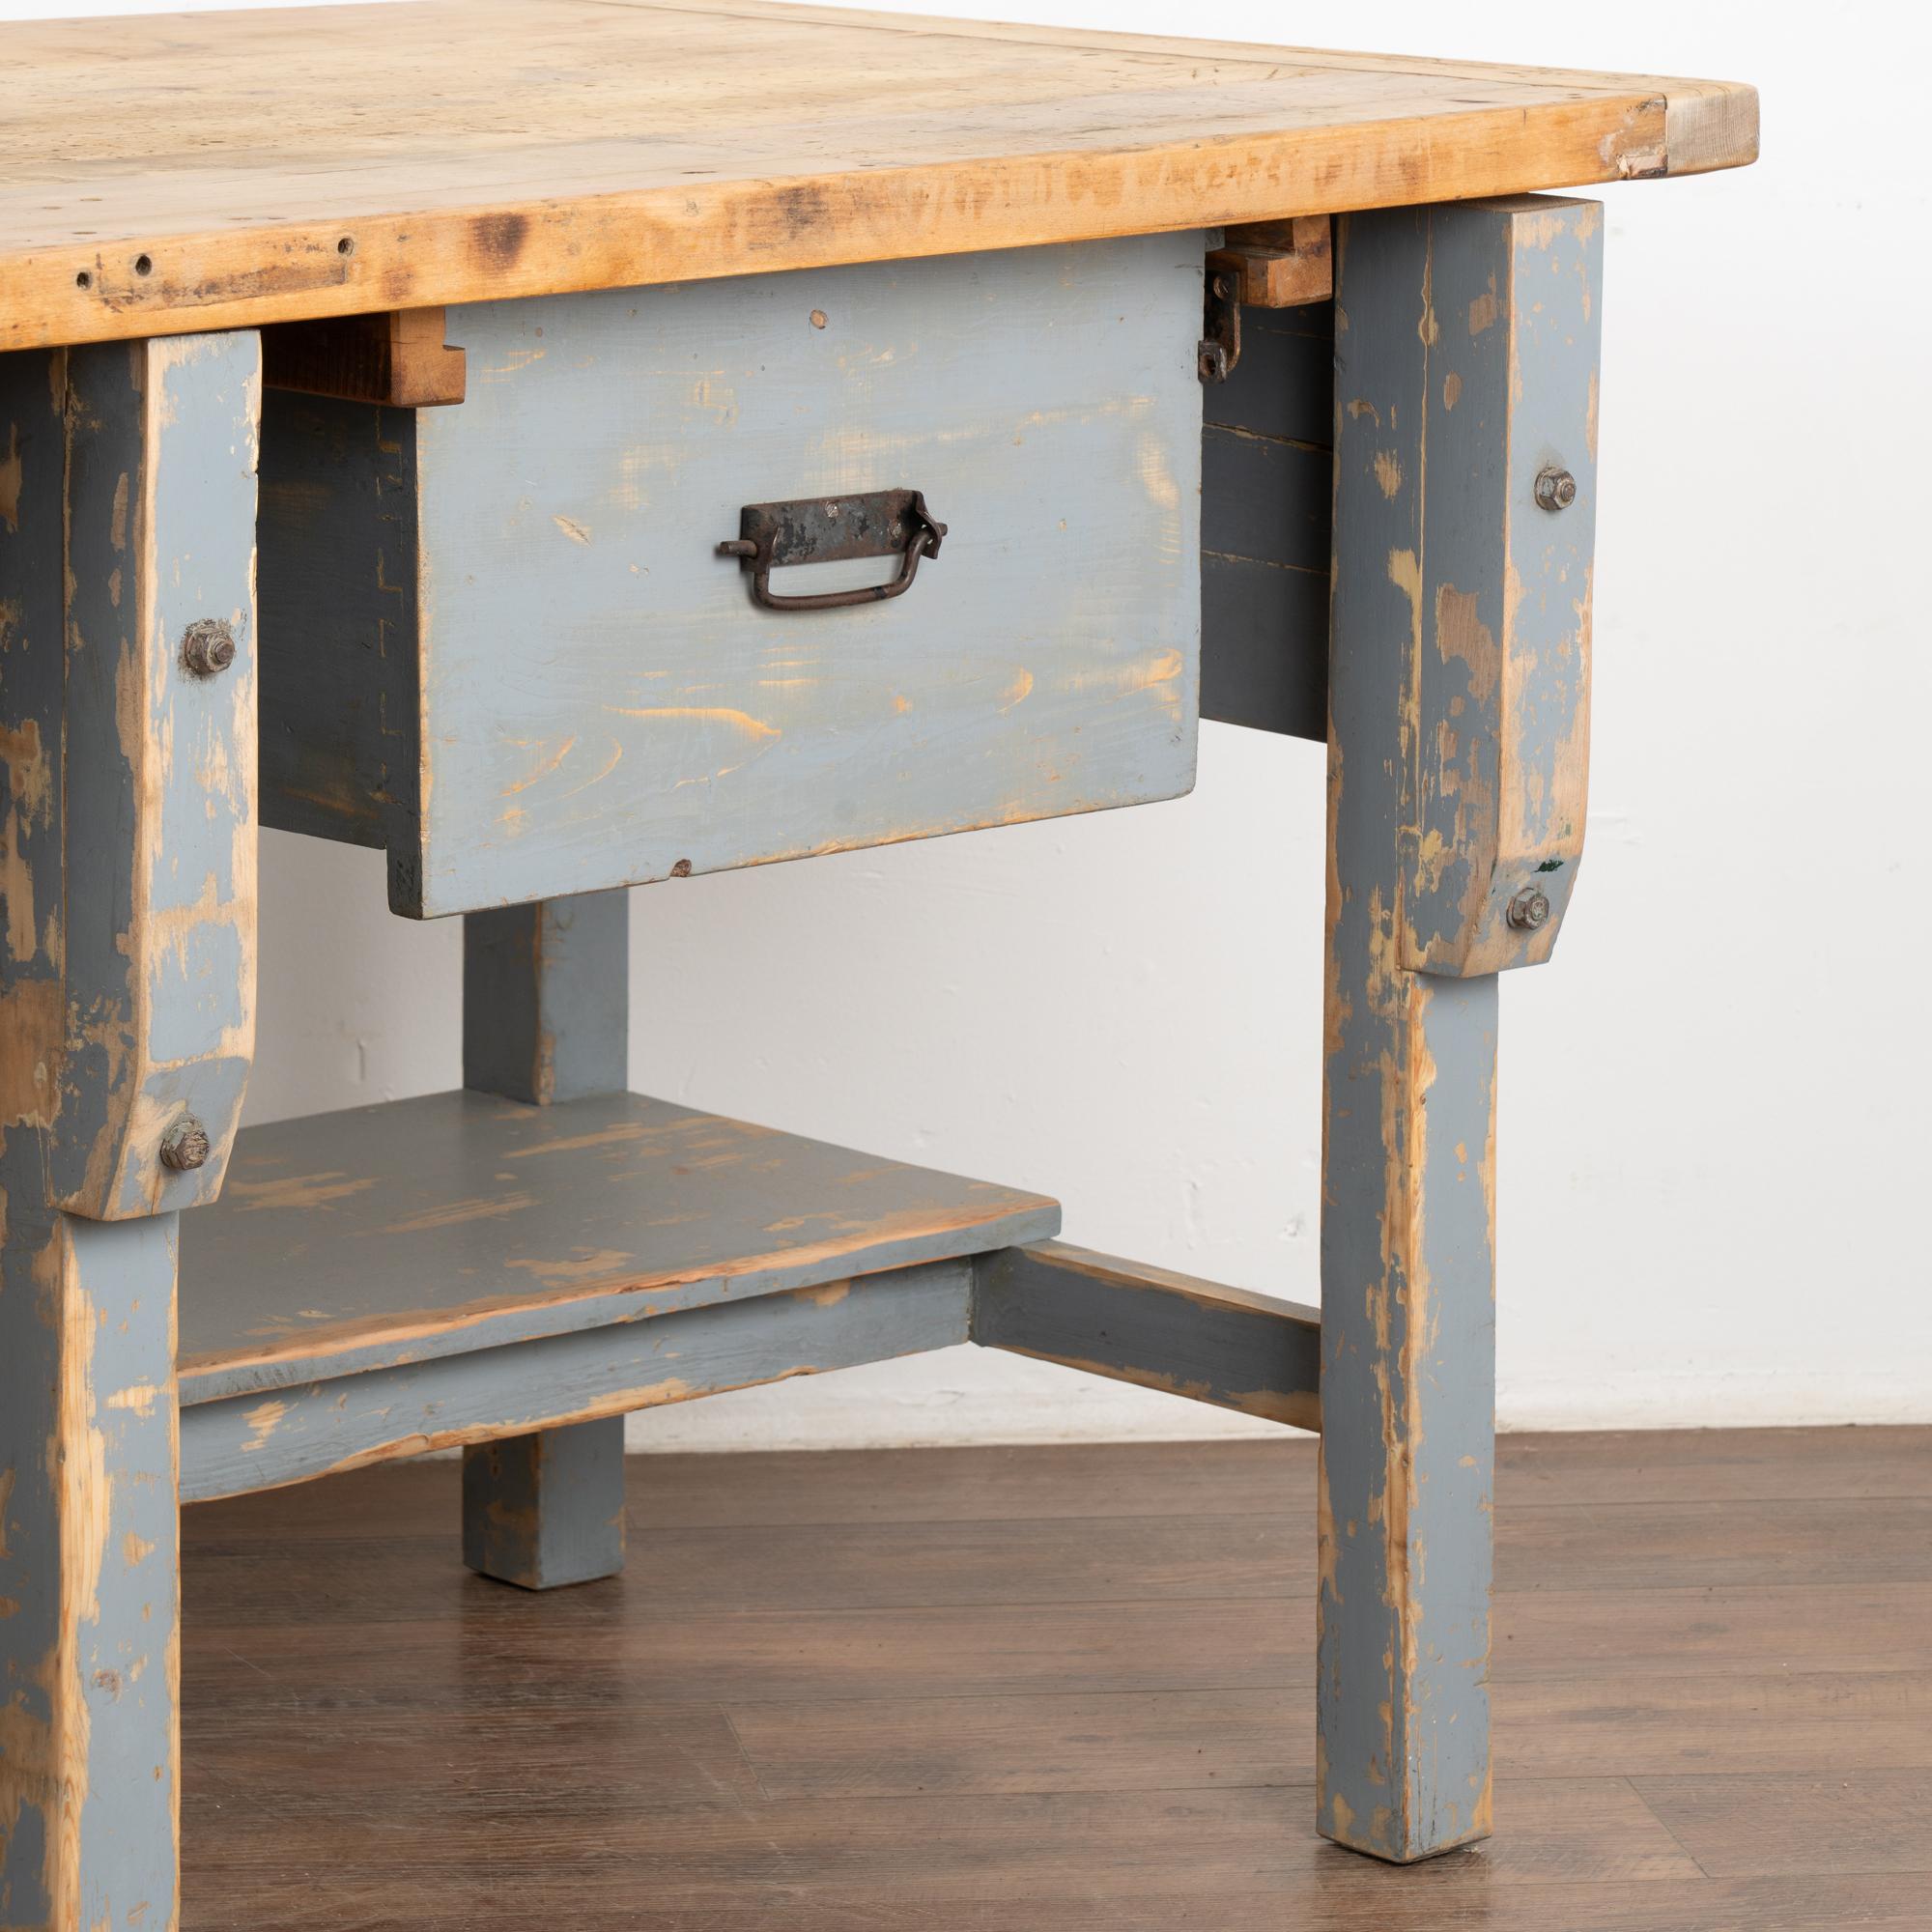 Wood Large Blue Rustic Work Table Kitchen Island With 2 Drawers and Shelf, Circa 1890 For Sale